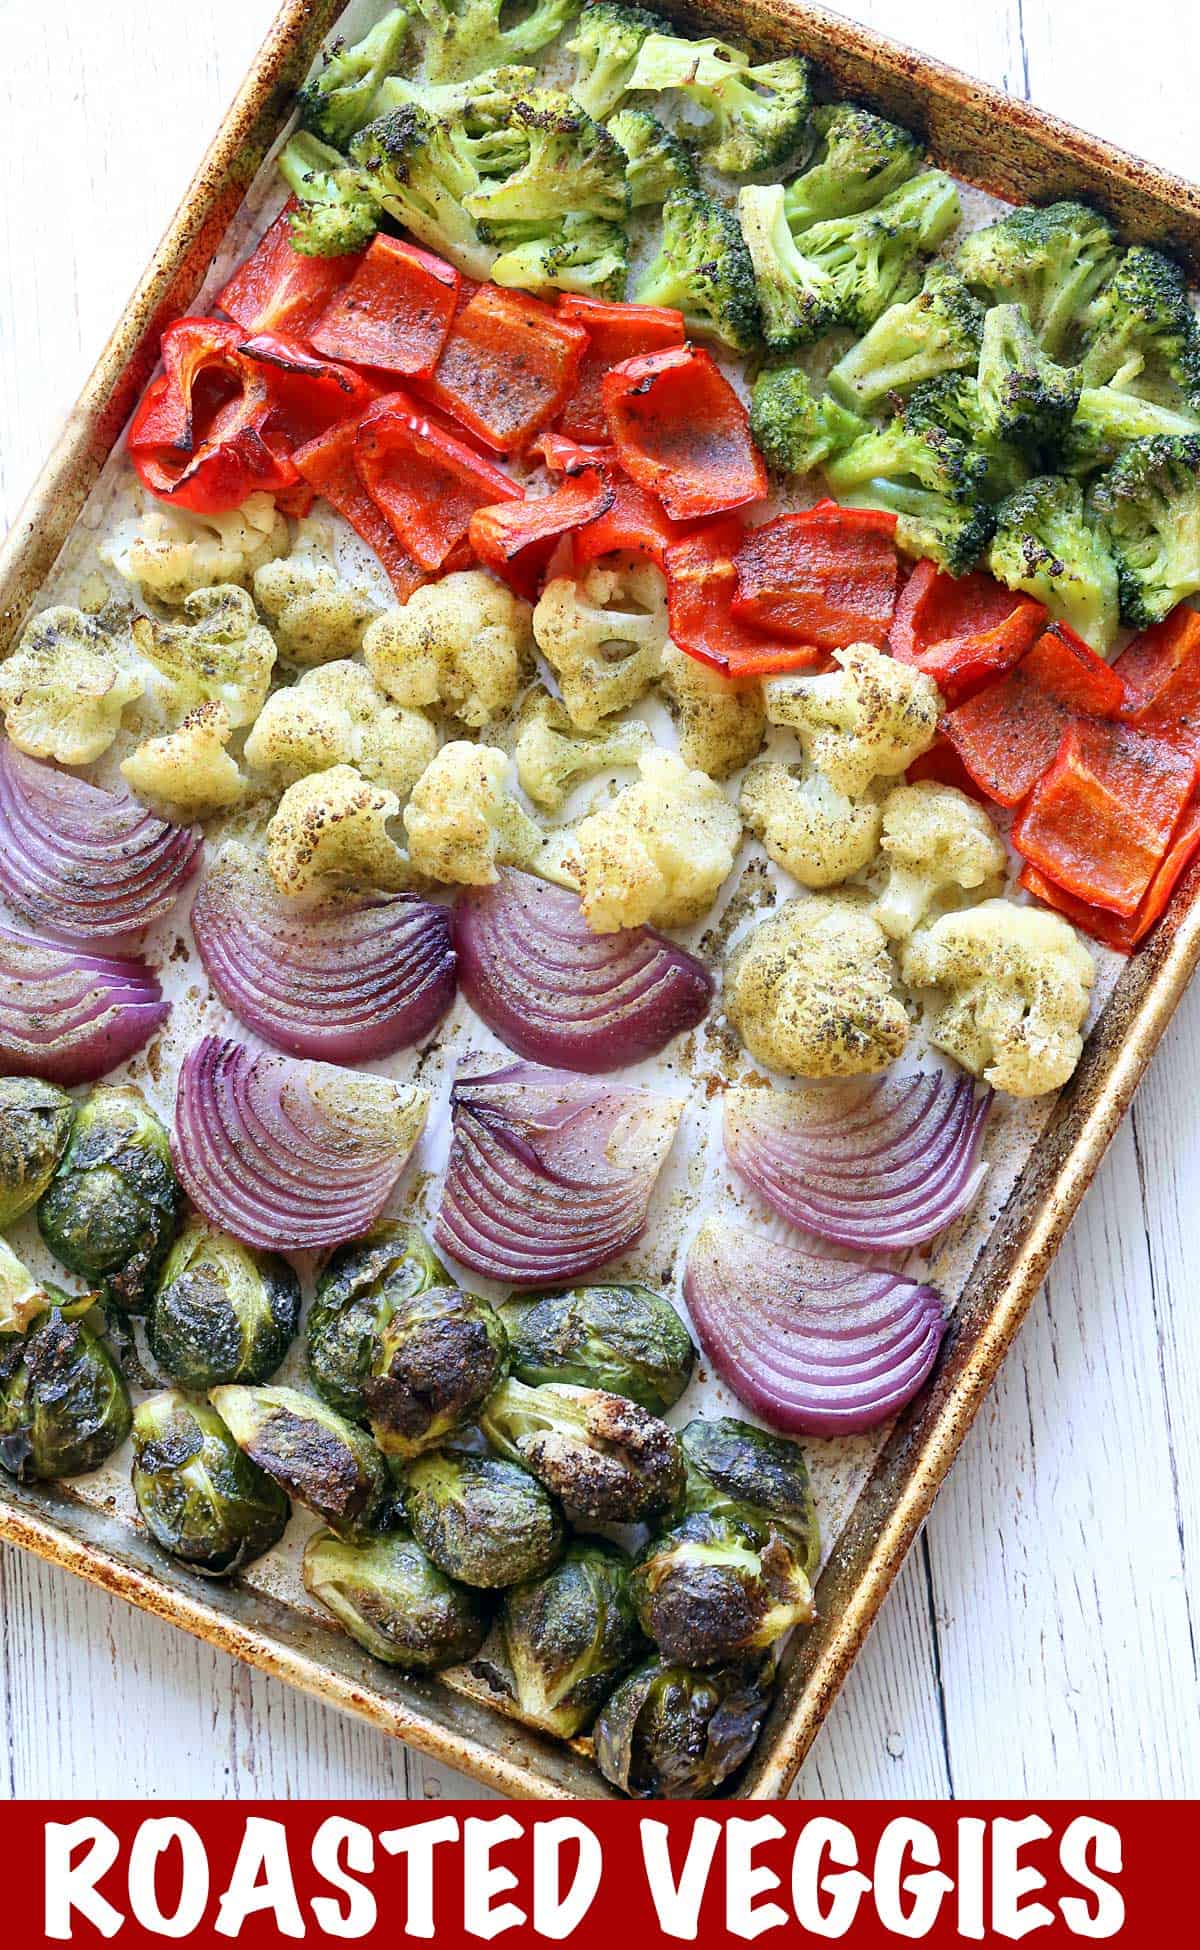 Oven-roasted vegetables (broccoli, cauliflower, red onion, and Brussels sprouts).